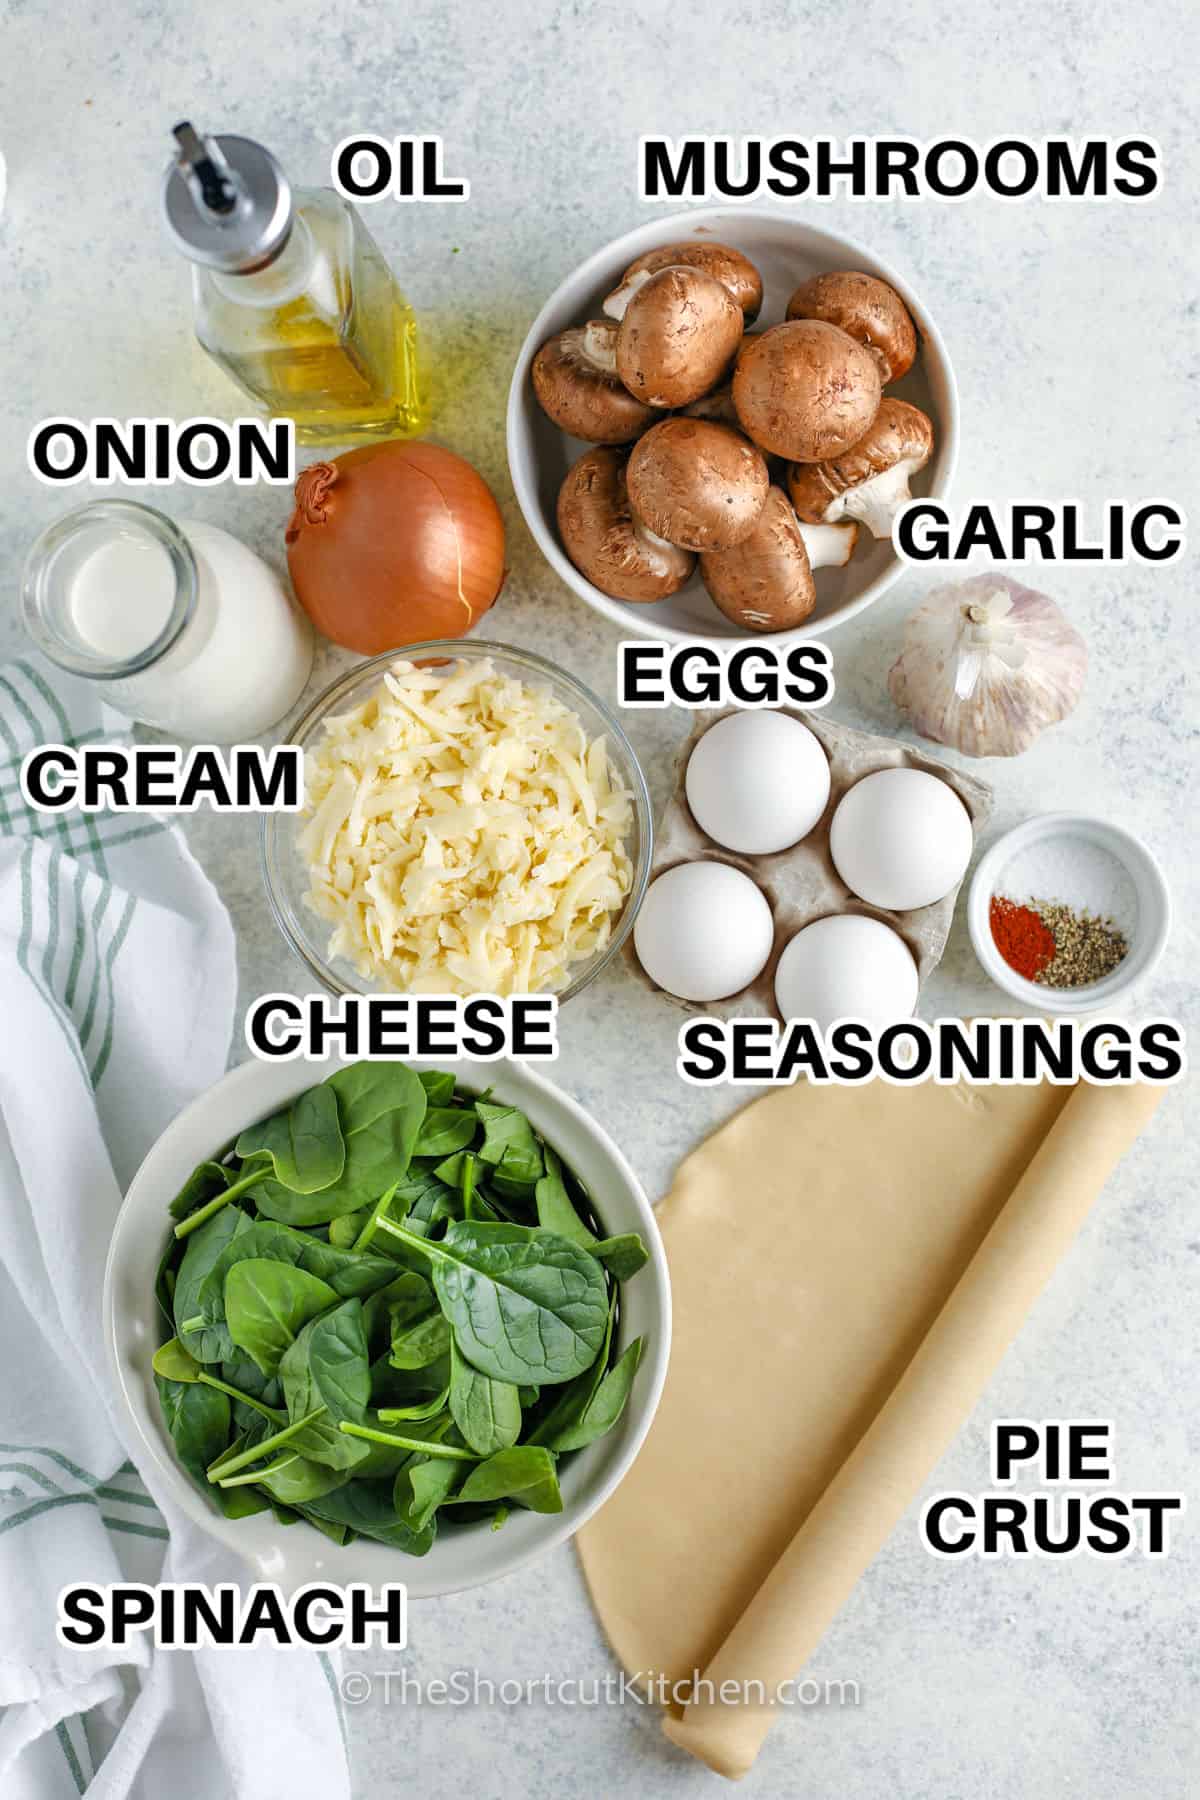 oil , mushrooms , onion , cream , cheese , eggs , garlic , seasonings , spinach and pie crust with labels to make Spinach Quiche Recipe